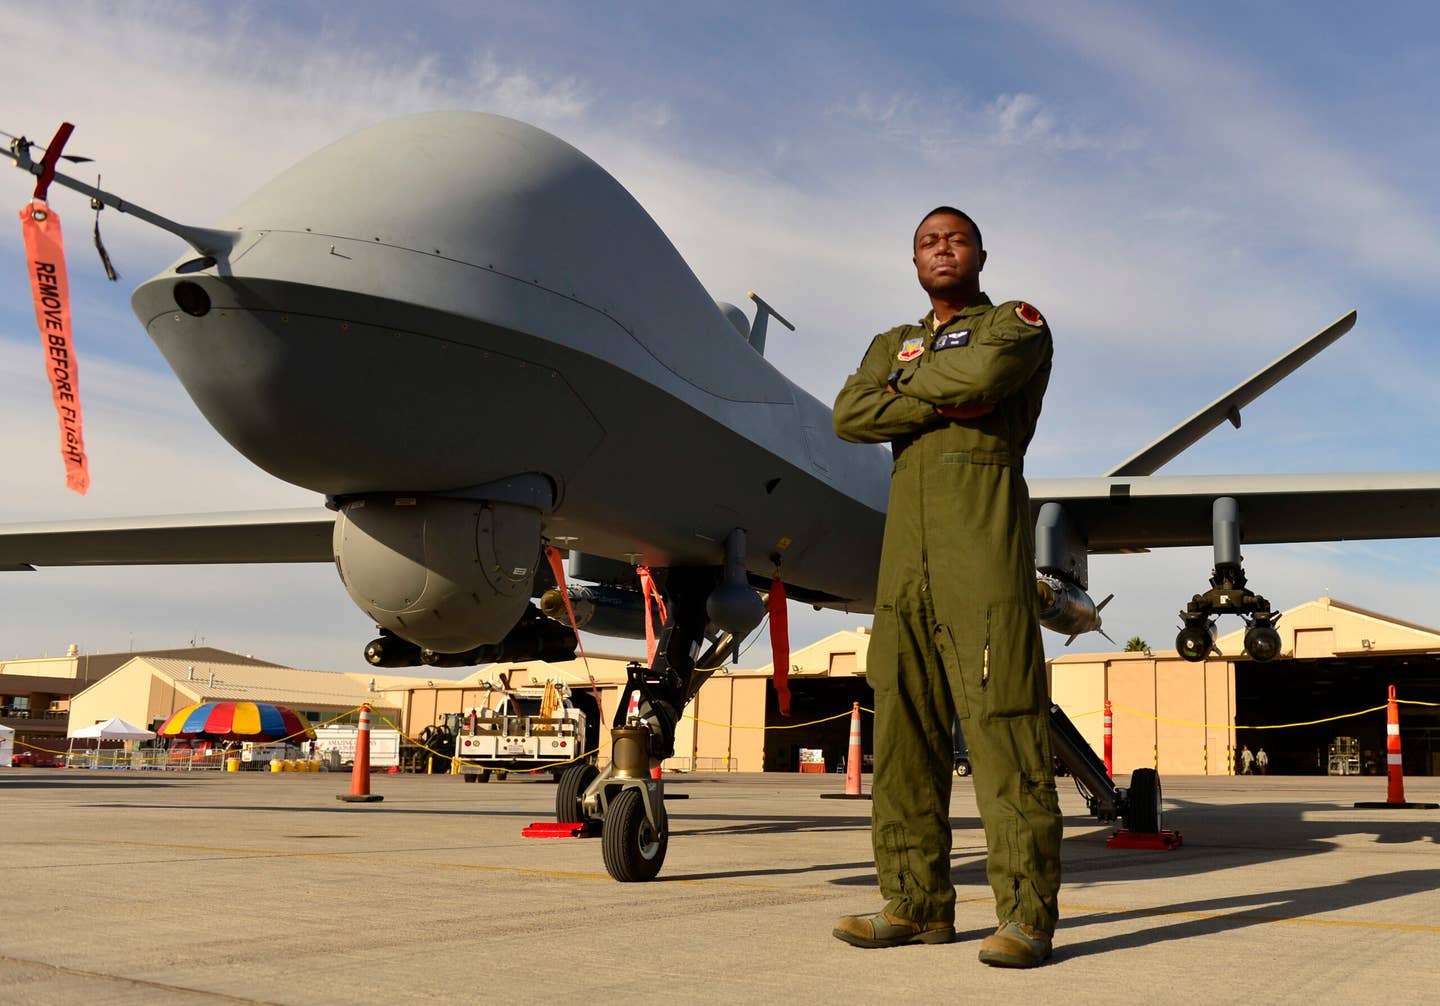 Staff Sgt. Kenneth, 432nd Wing MQ-9 sensor operator, stands in front of an MQ-9 Reaper during Aviation Nation Nov. 11, 2016. <em>Credit: U.S. Air Force photo by Senior Airman Christian Clausen</em>